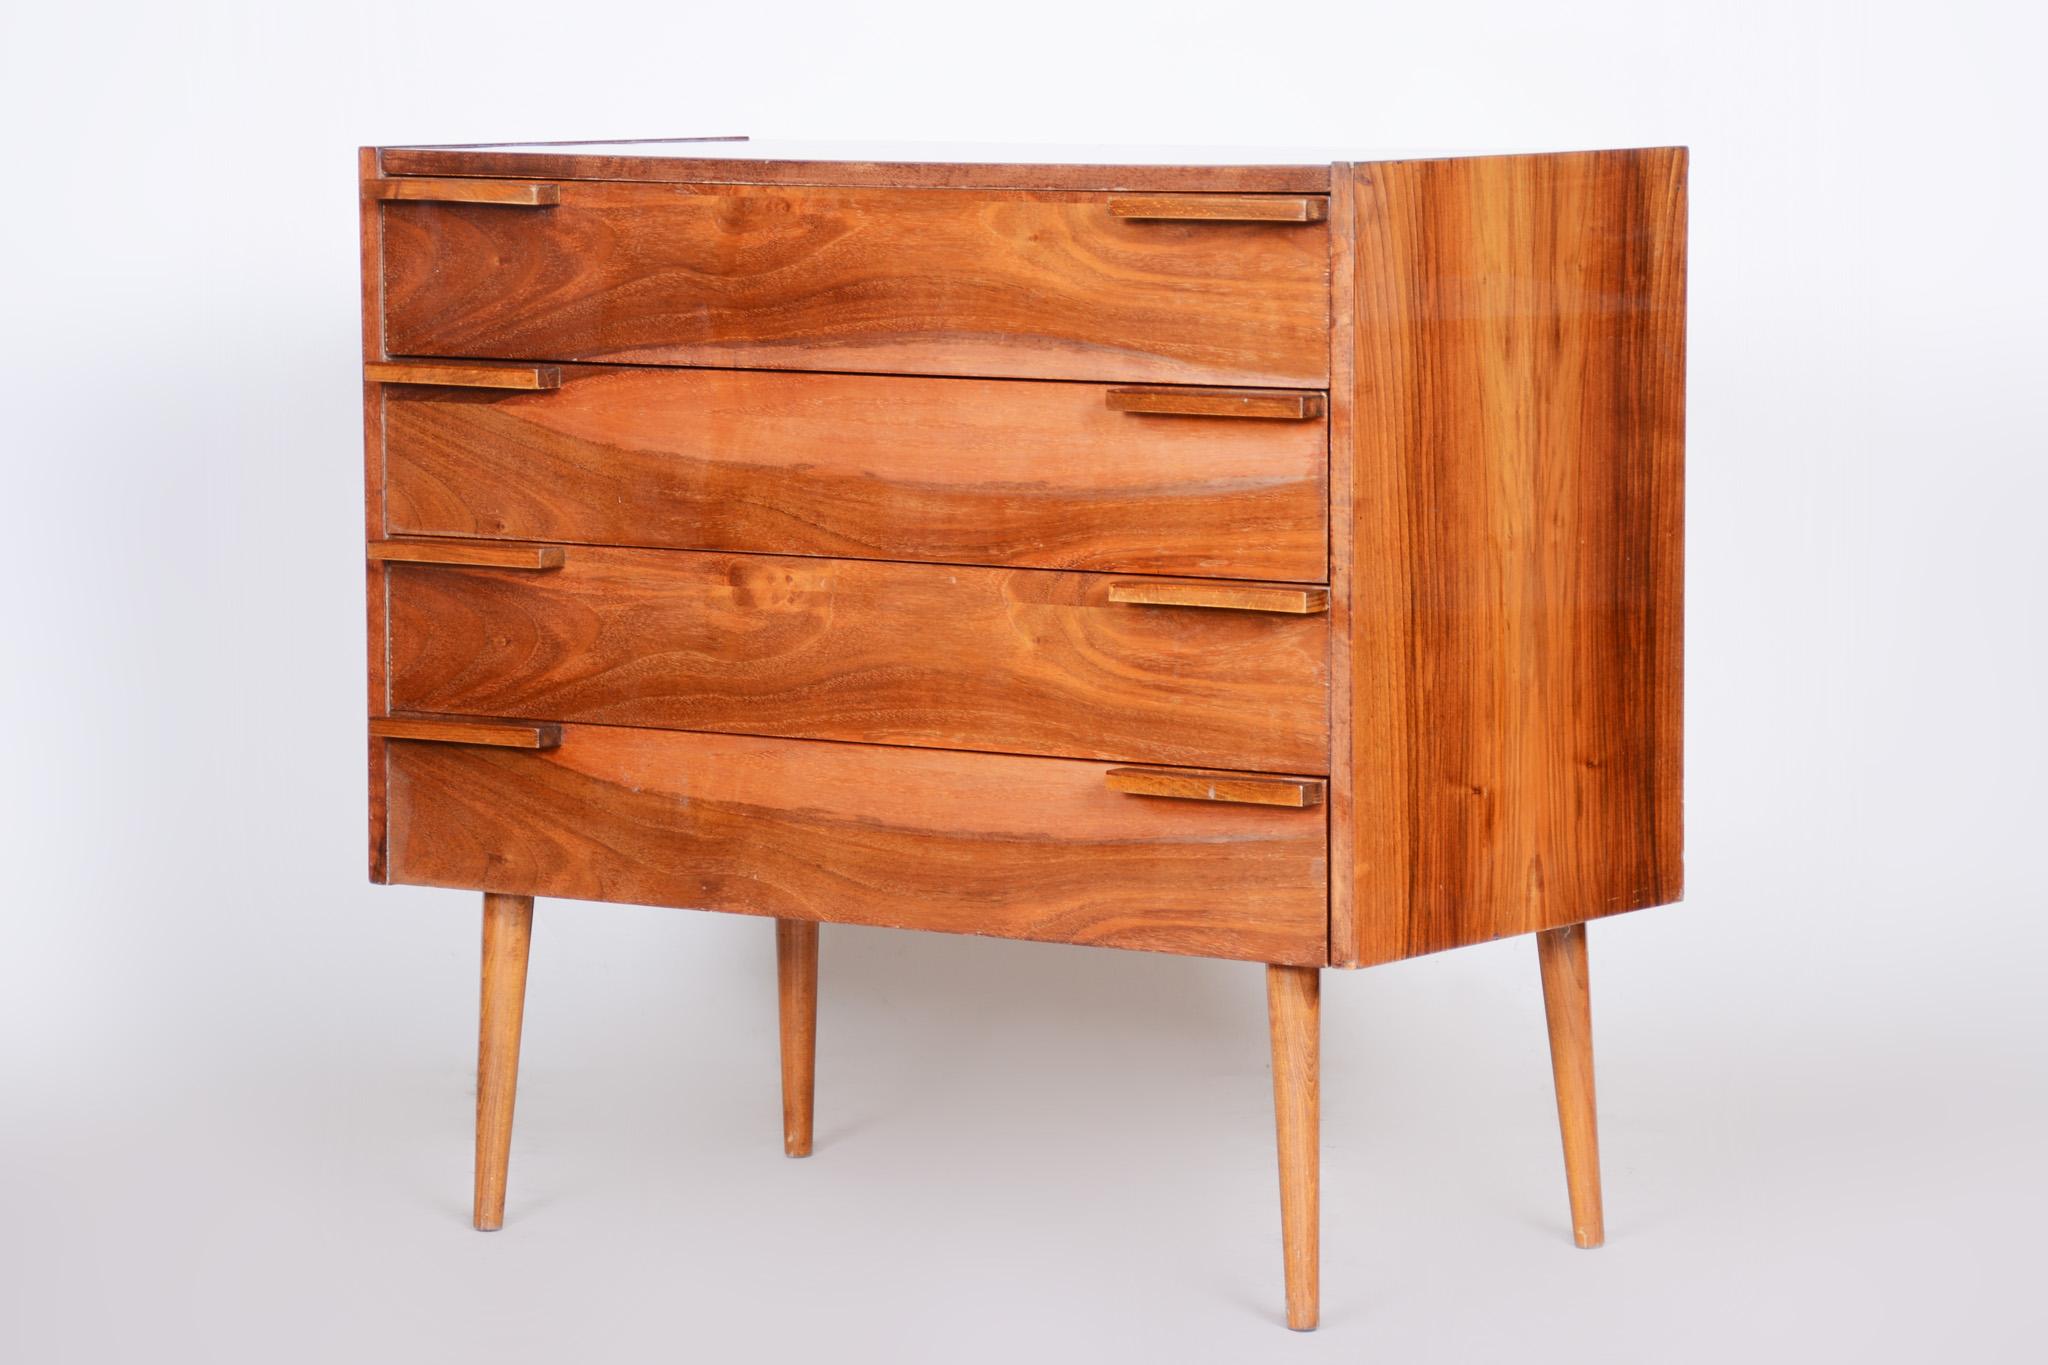 Wood Mid Century Walnut Chest of Drawers, Commode, Made in Czechia, 1960s, Original For Sale